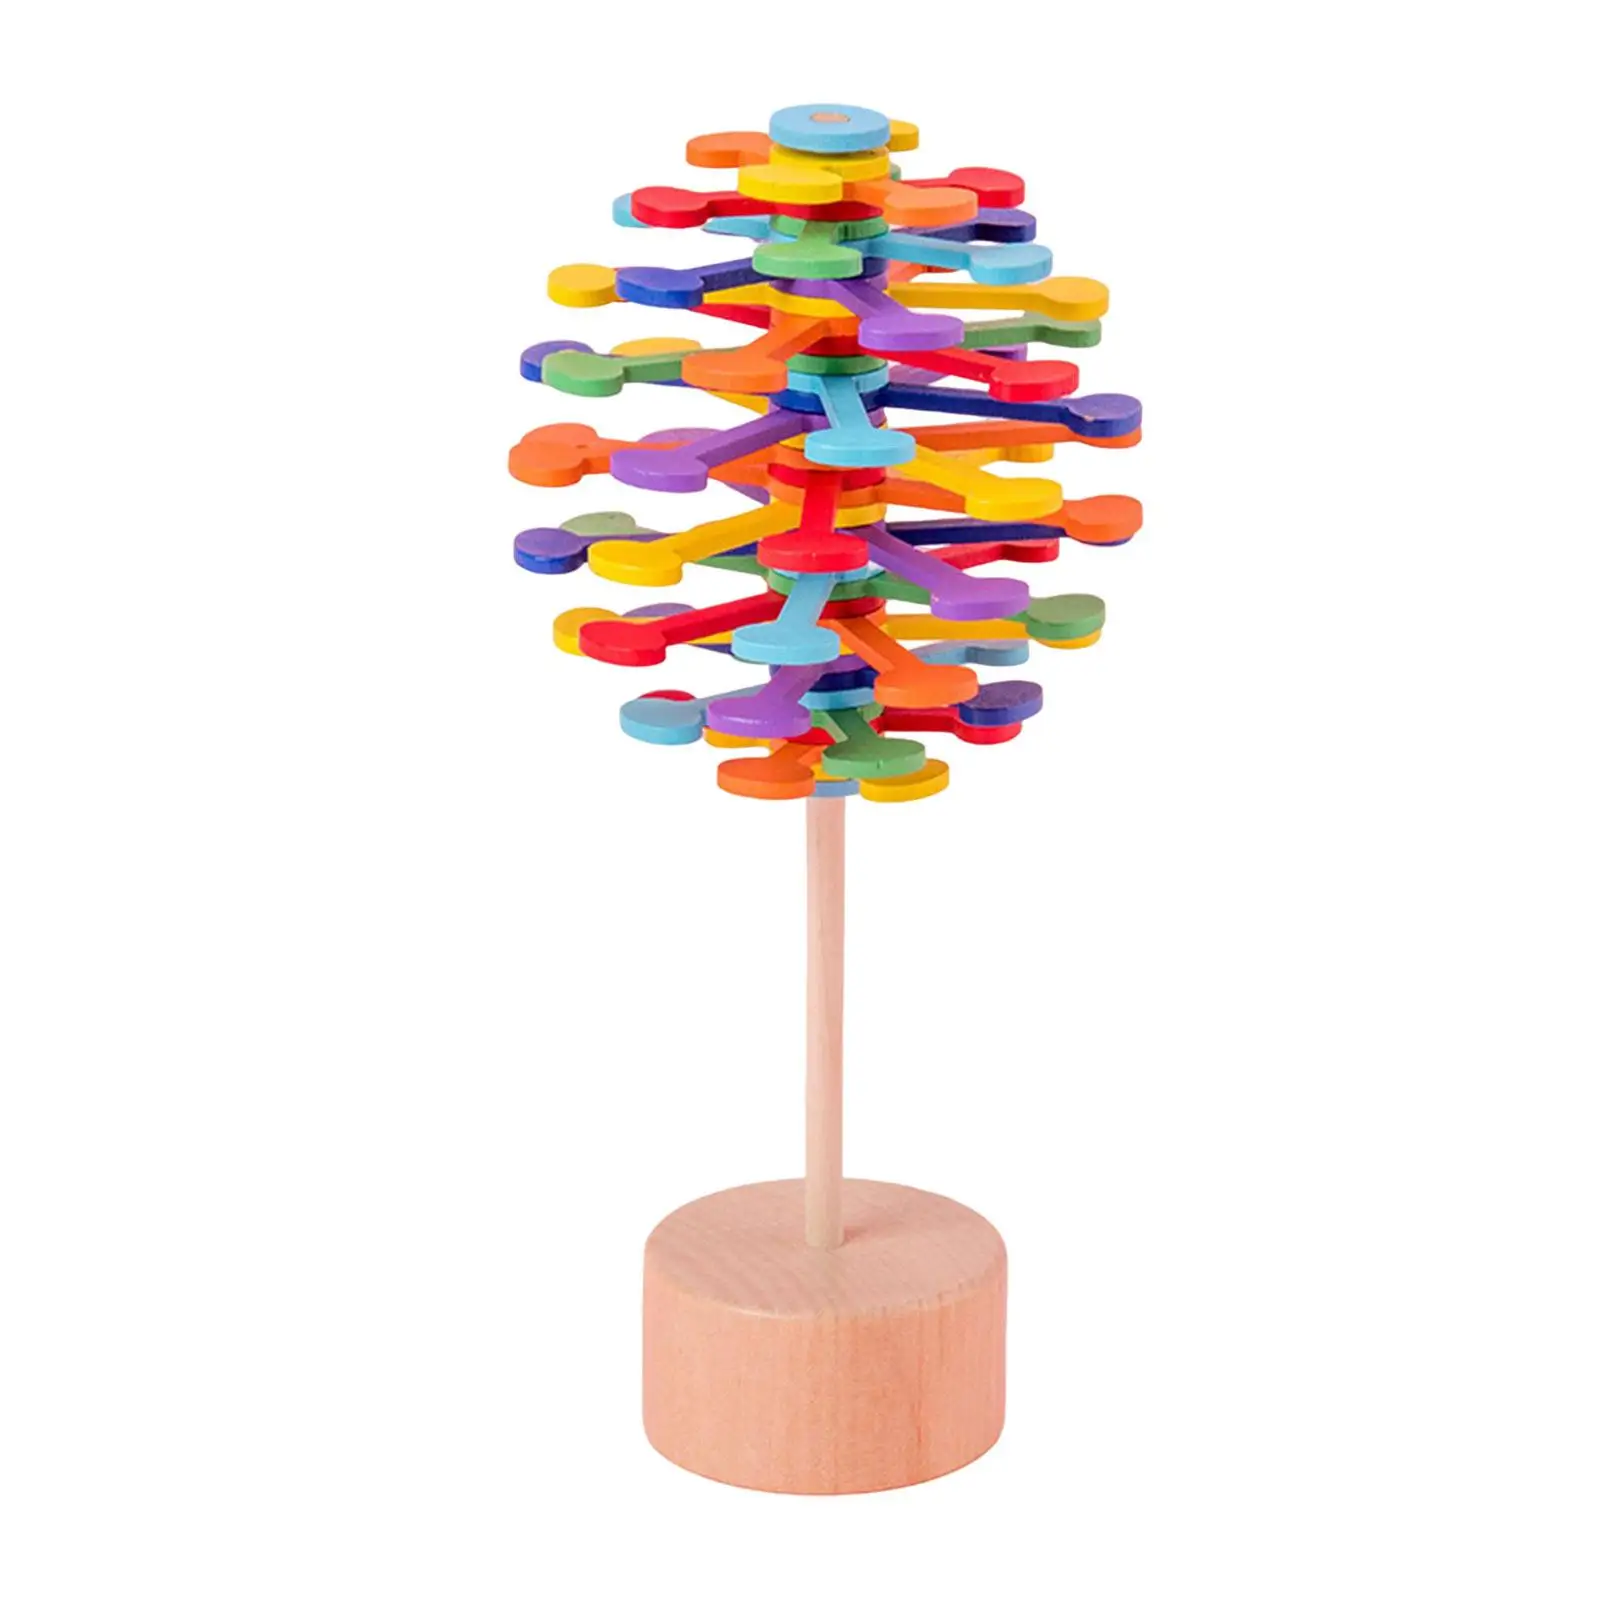 Creative Wooden Rotary Spiral Lollipop Sensory Toys Desktop Ornaments Multicolor Rotating Spiral Lollipop for Birthday Home